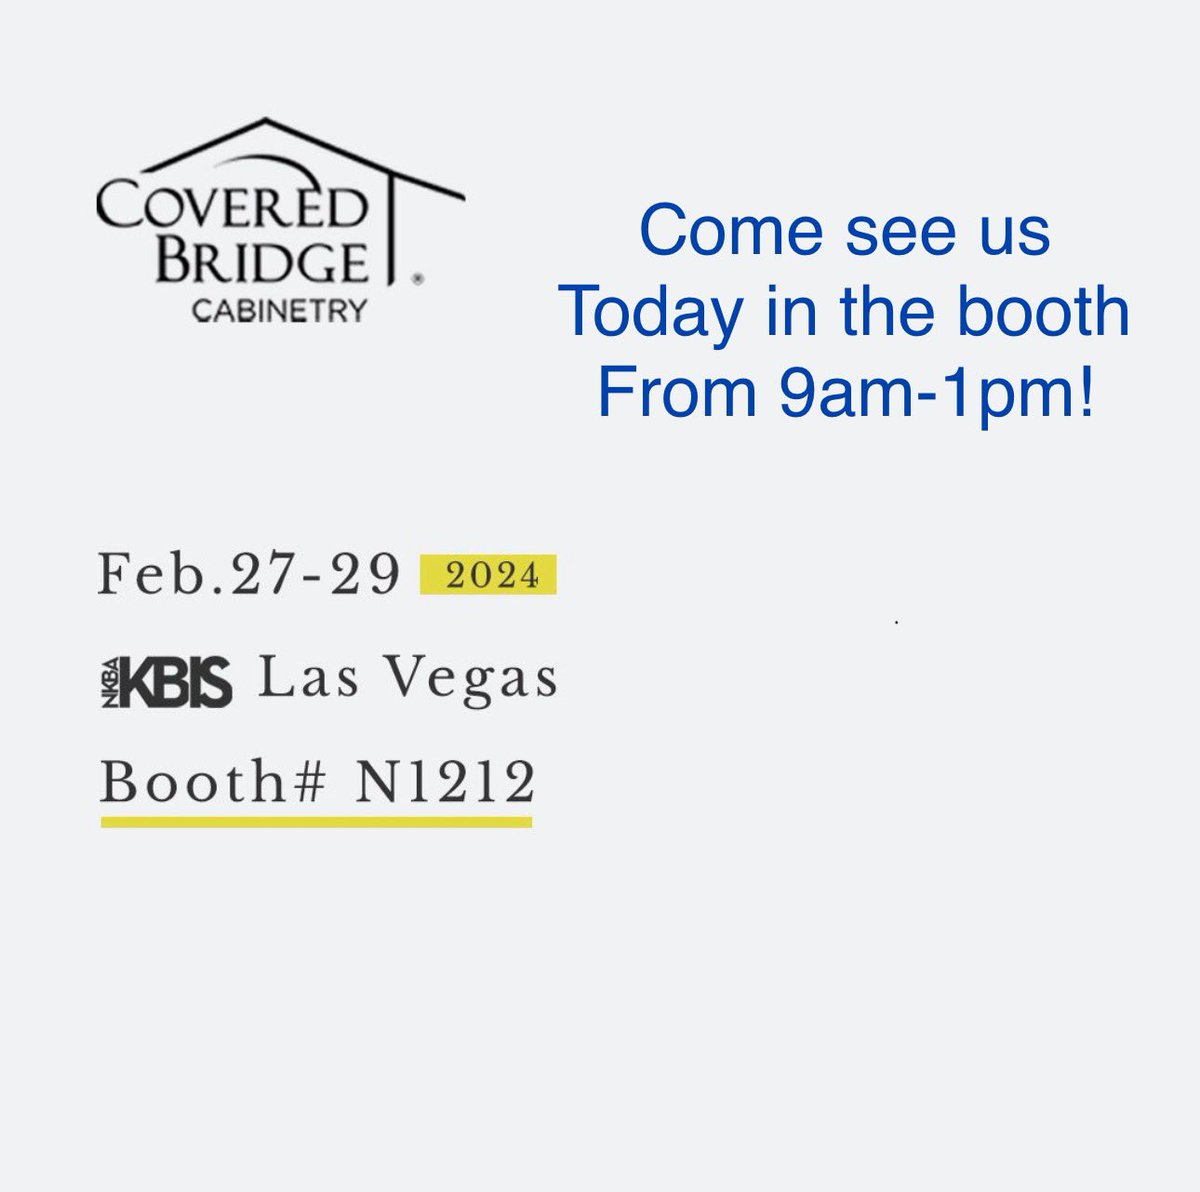 Come see our team today from 9-1 at @KBIS in the #coveredbridge cabinet booth N1212 #kbis2024 #kbis